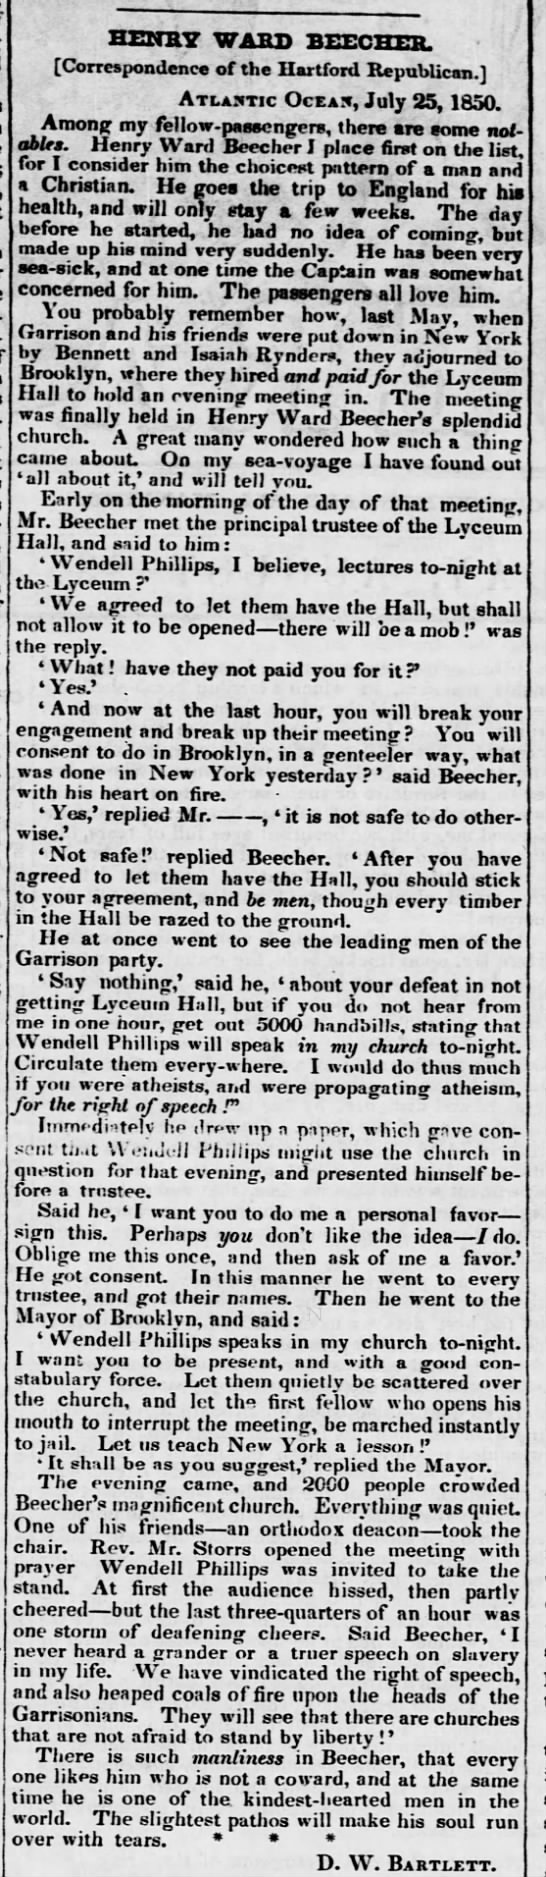 Henry Ward Beecher offers his church for abolitionist lecture - 